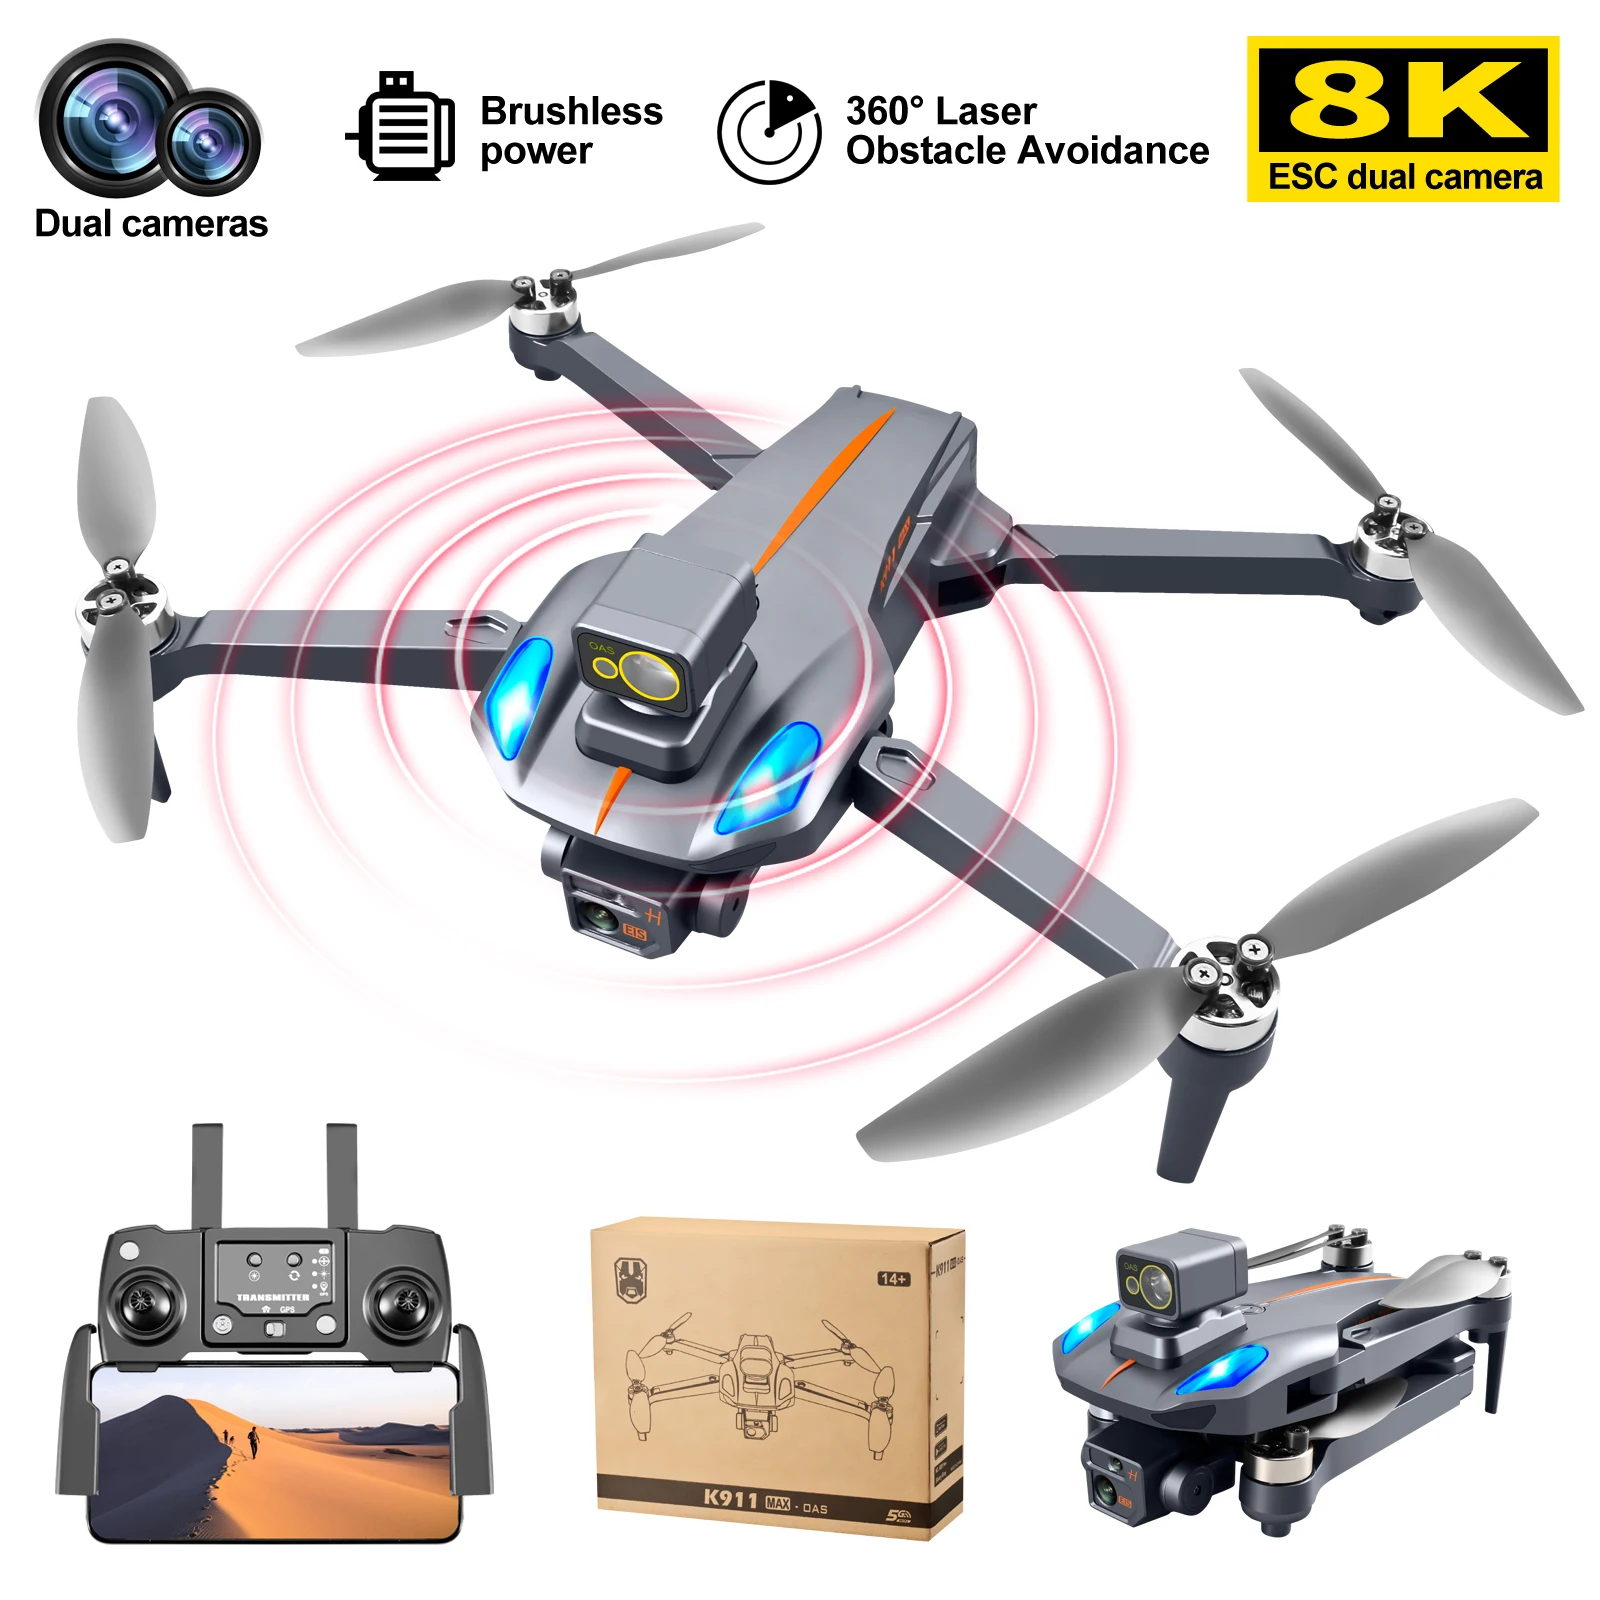 

2022 New Drone 5G WIFI GPS 8K HD Dual Camera 360° Obstacle Avoidance 1200m RC Distance Brushless Motor Quadcopter Best Gift